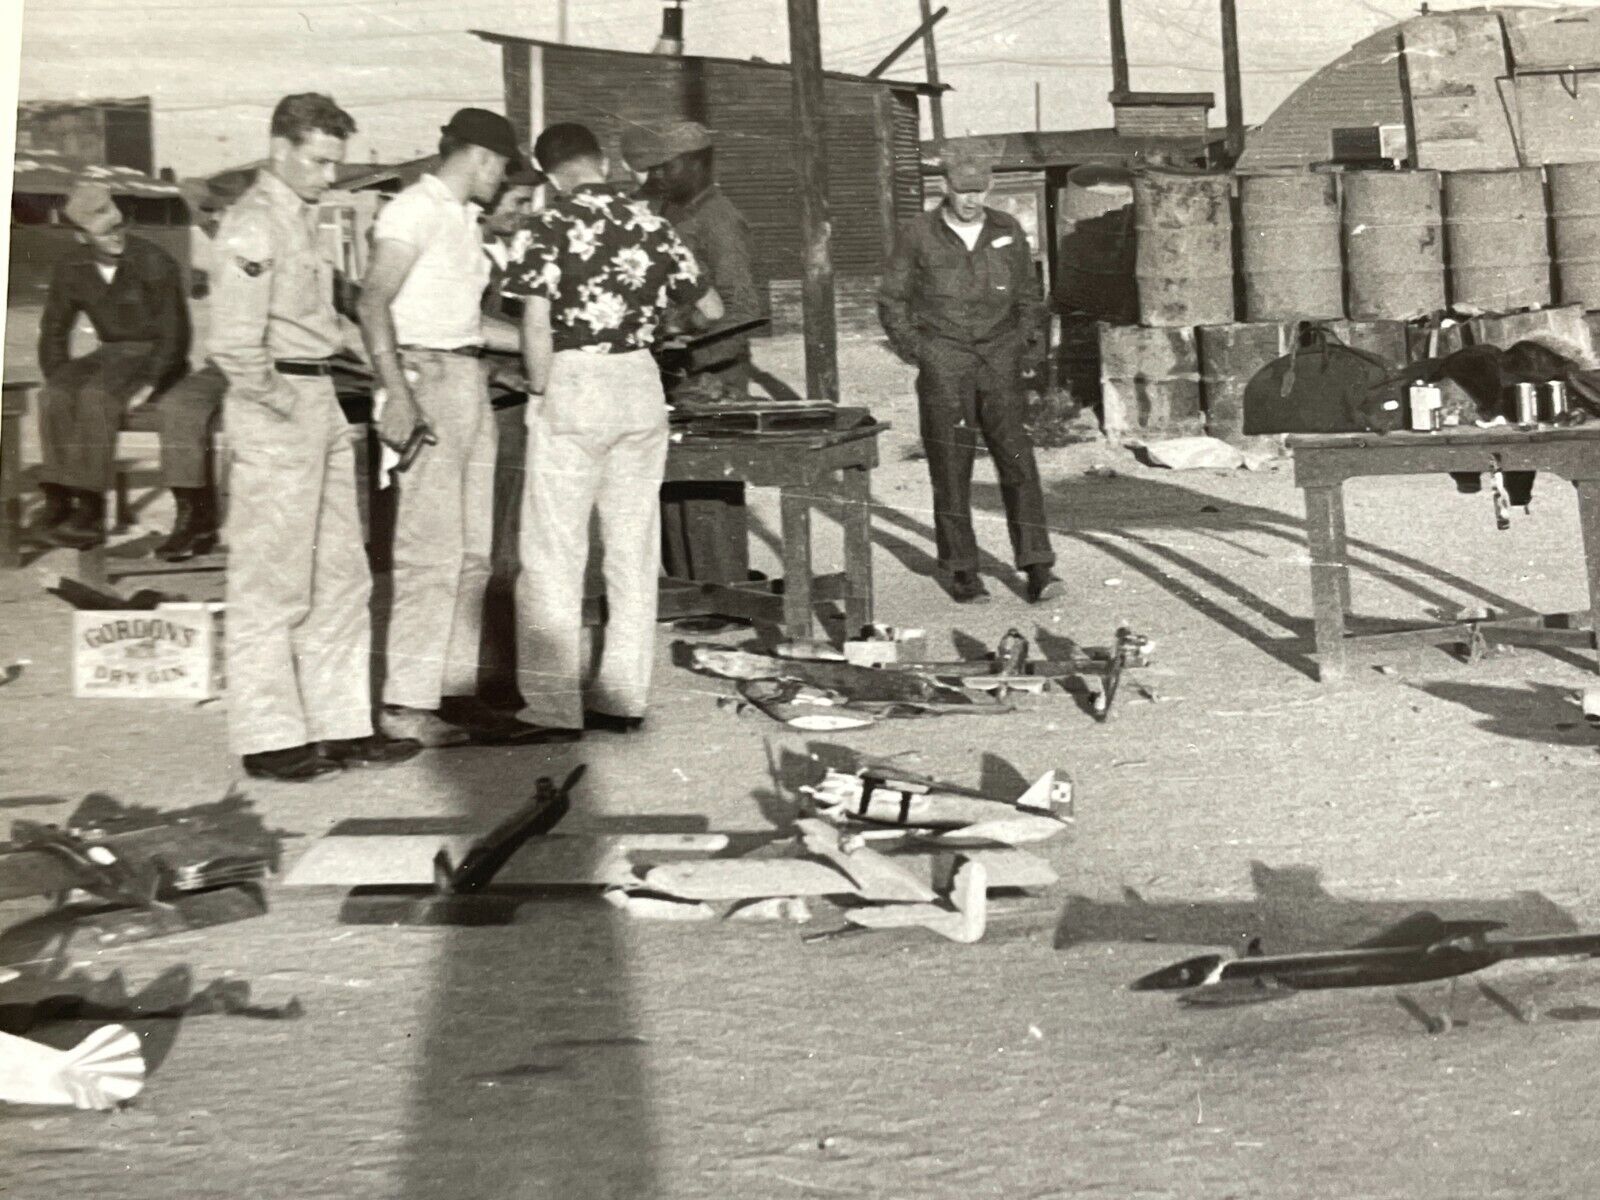 A5 Photograph Military Men Playing With Model RC Motor Airplane Toys 1940-50's